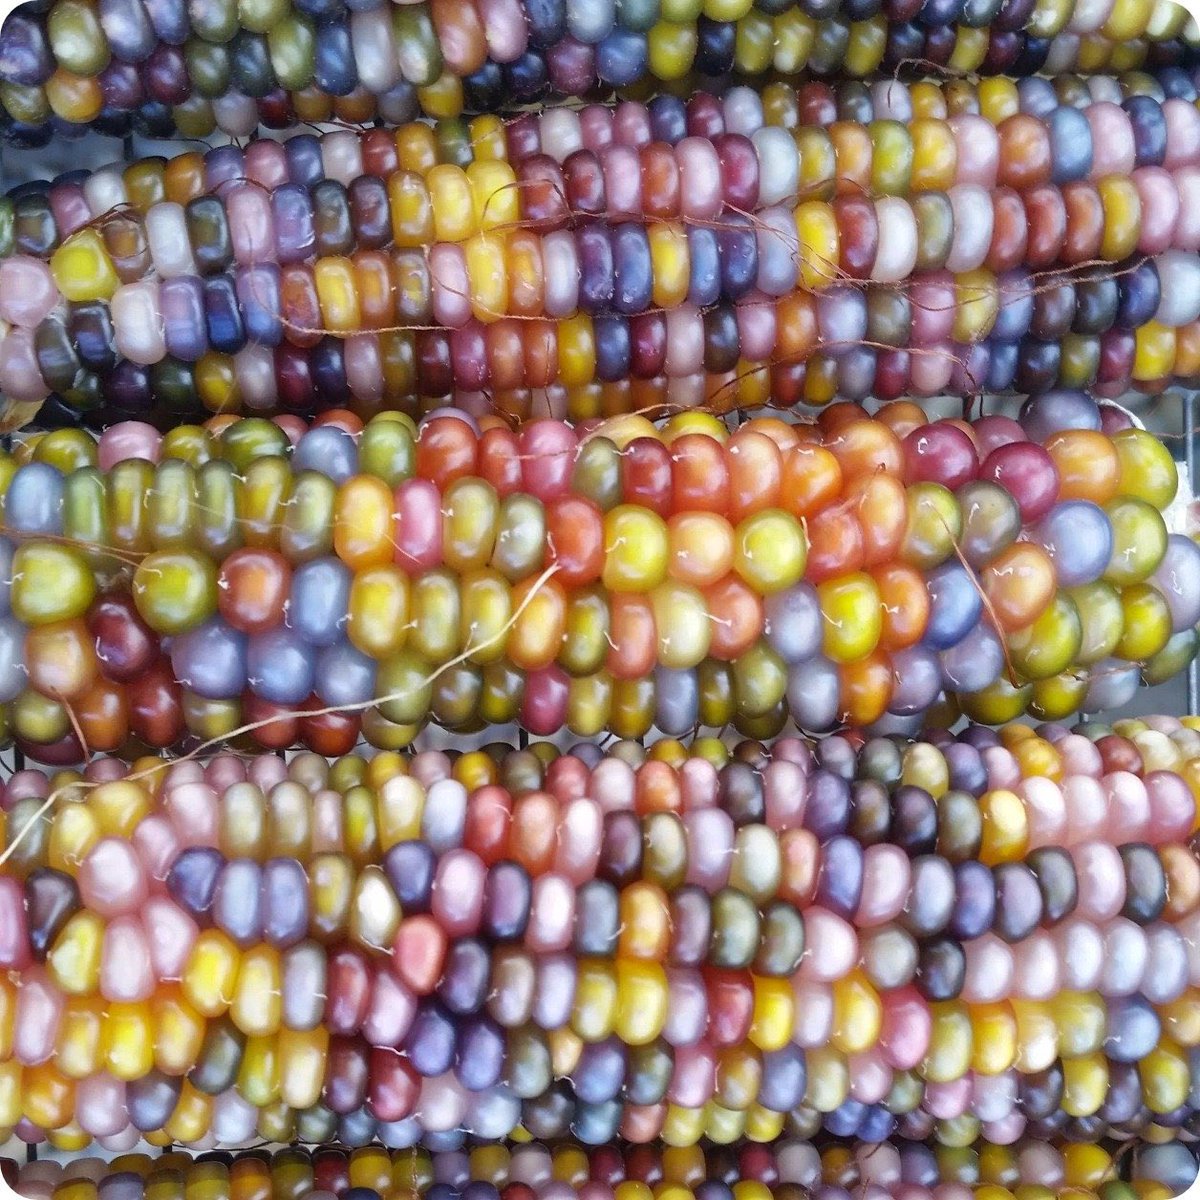 the multicolored corn in that picture is a strain of corn called Glass Gem Corn, and it was developed through selective breeding - form of genetic modification - in 1994if this corn was a person it would barely be old enough to rent a car